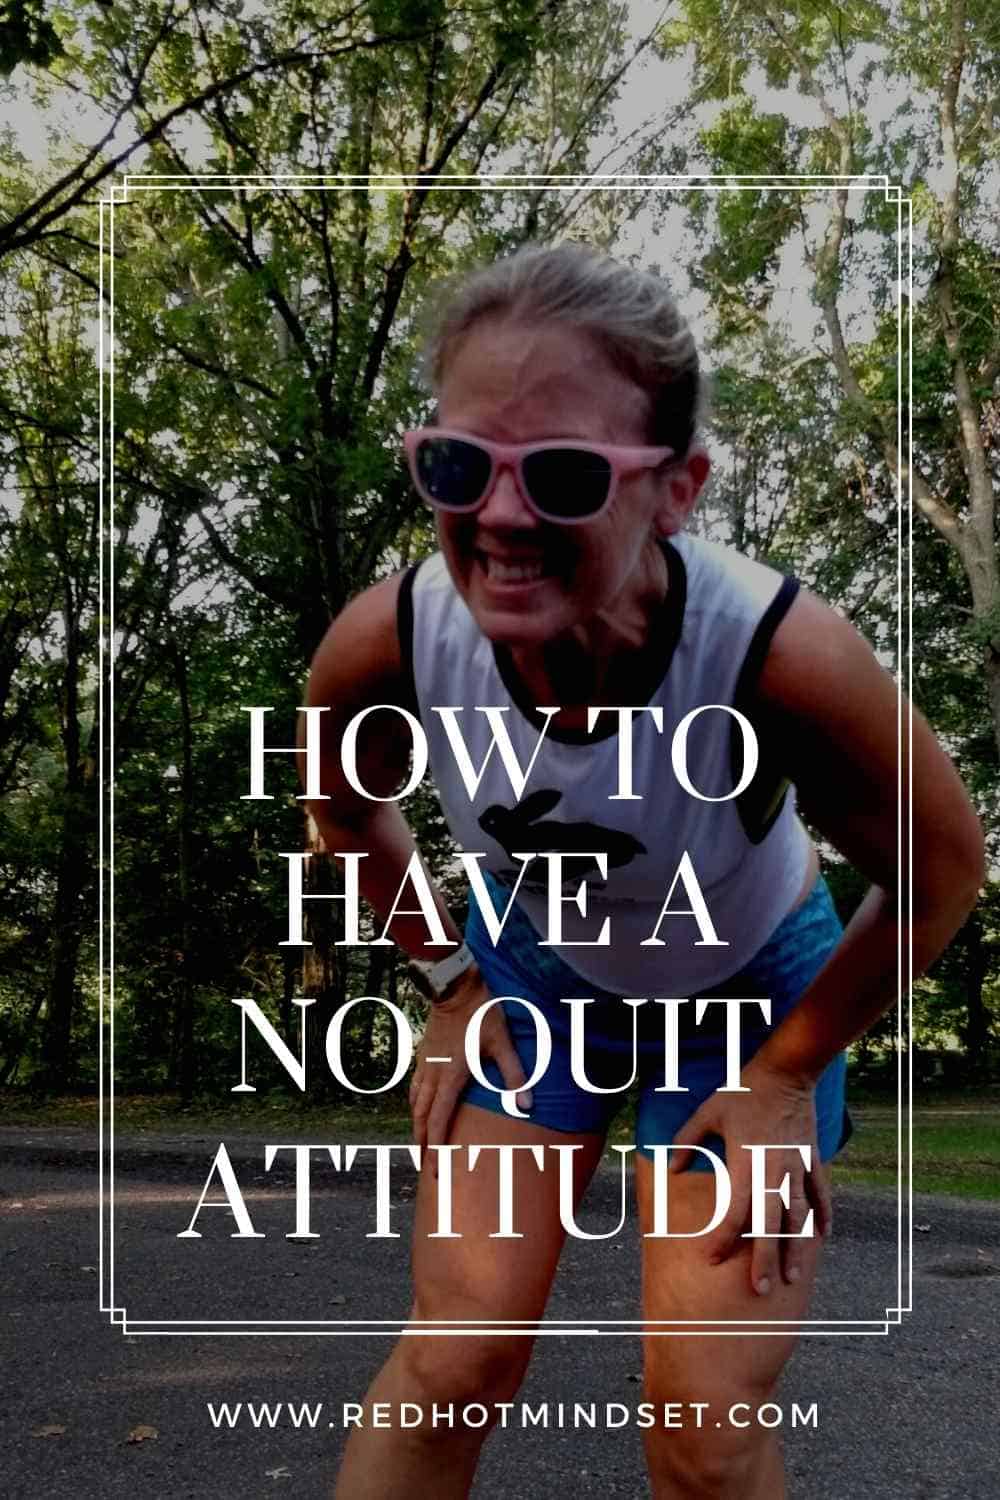 Ep 49 | How a No-Quit Attitude Led One Runner to a Strong Boston-Qualifying Finish